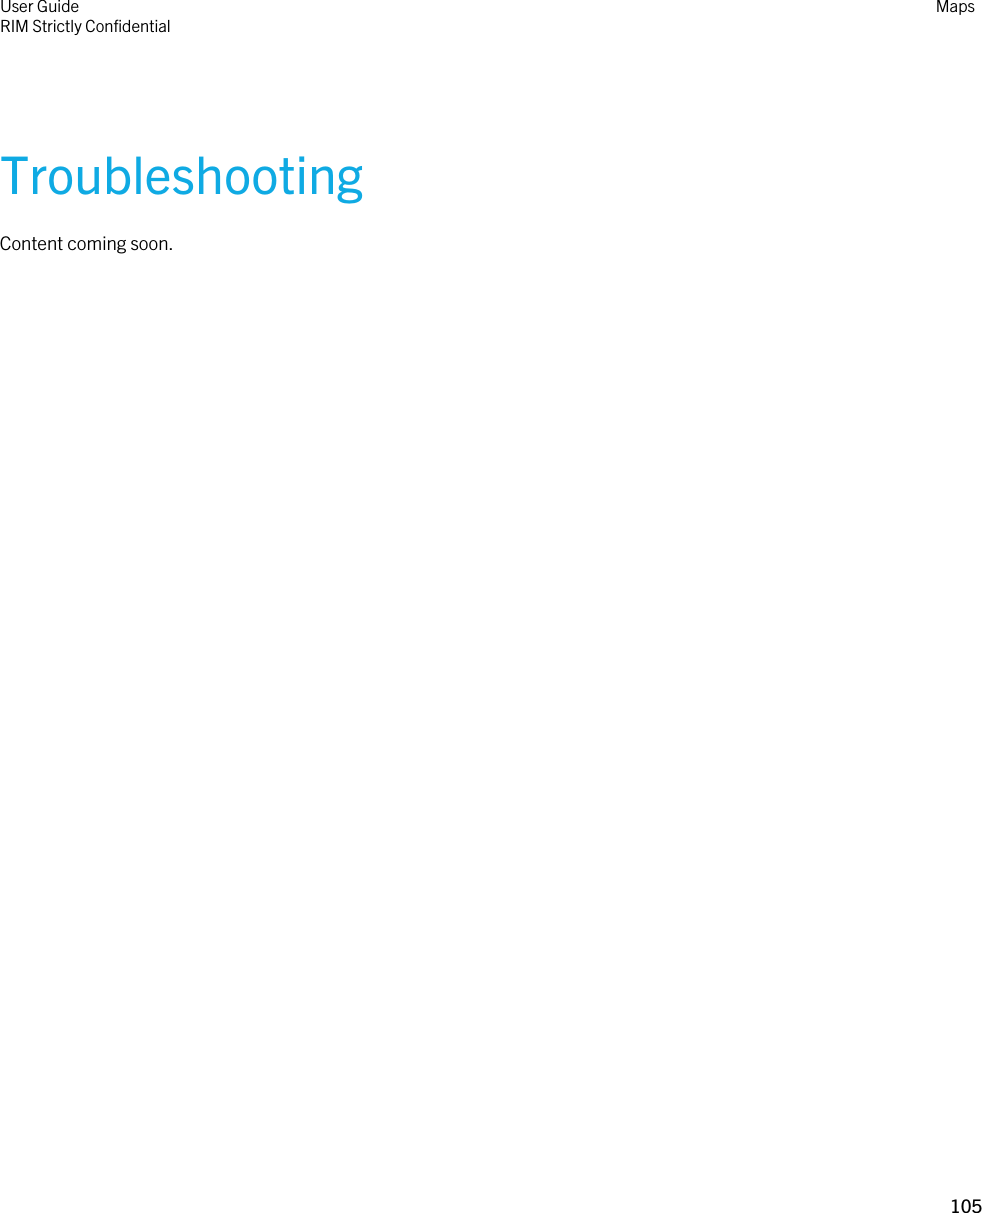 TroubleshootingContent coming soon.User GuideRIM Strictly Confidential Maps105 